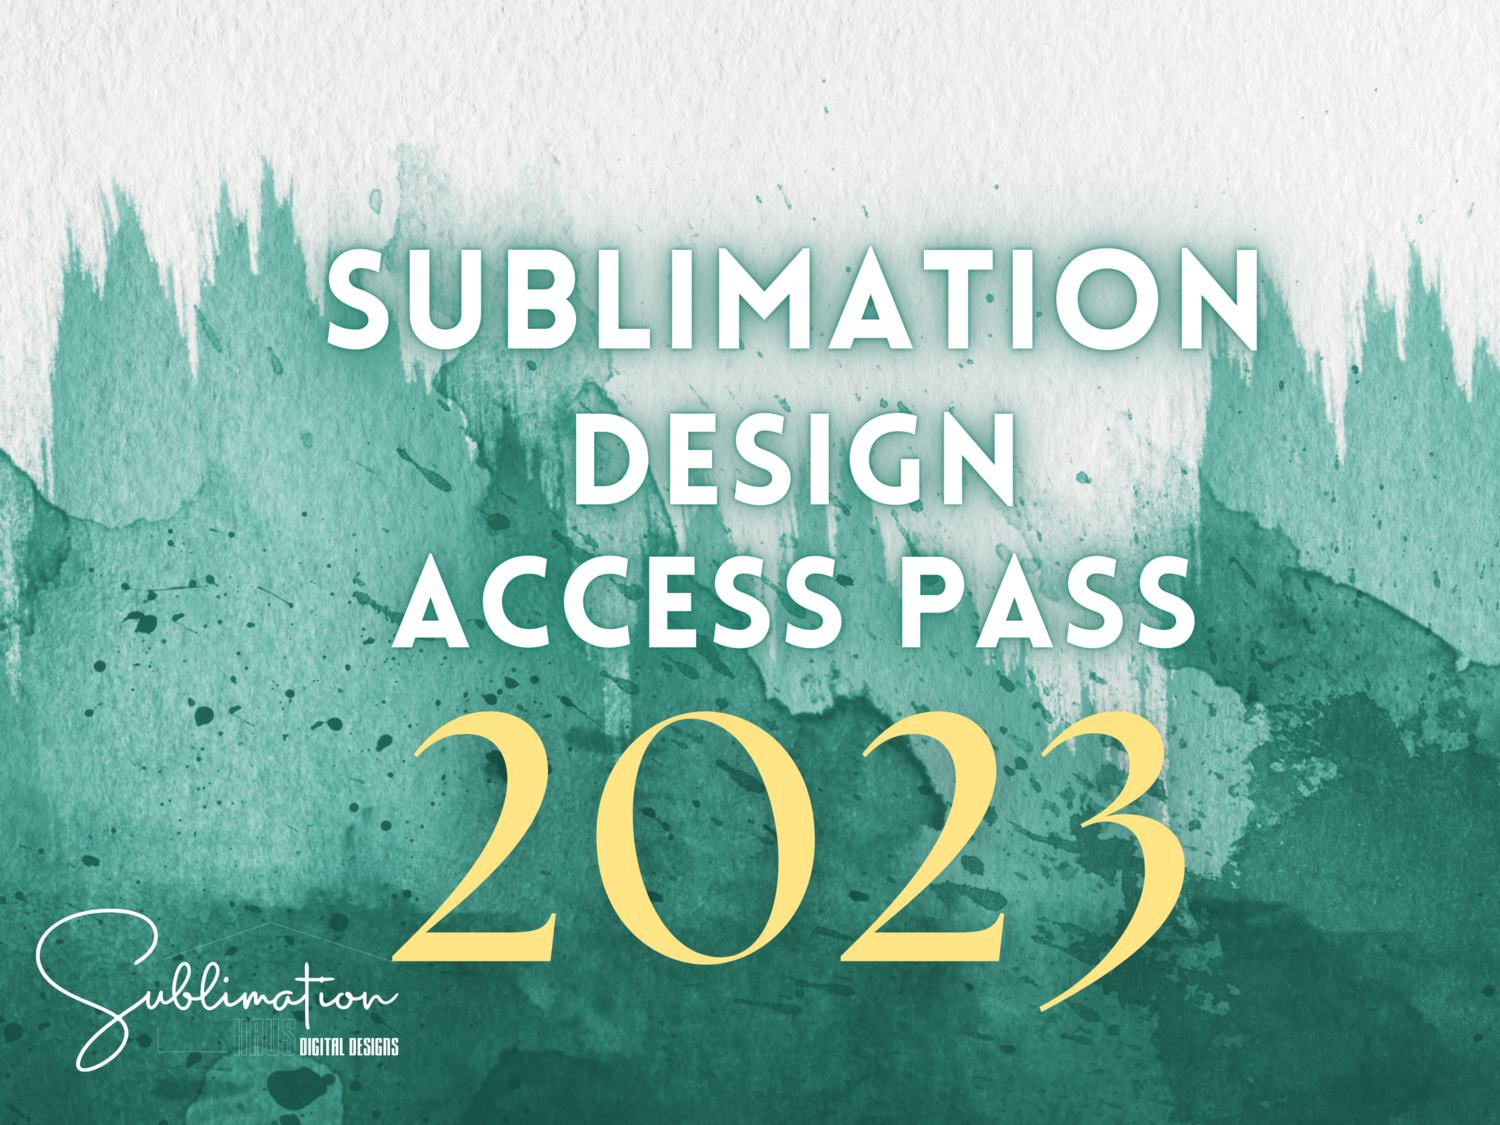 2023 ALL ACCESS PASS - Sublimation Designs - Subscription - 3 of 4 payments - $43.75